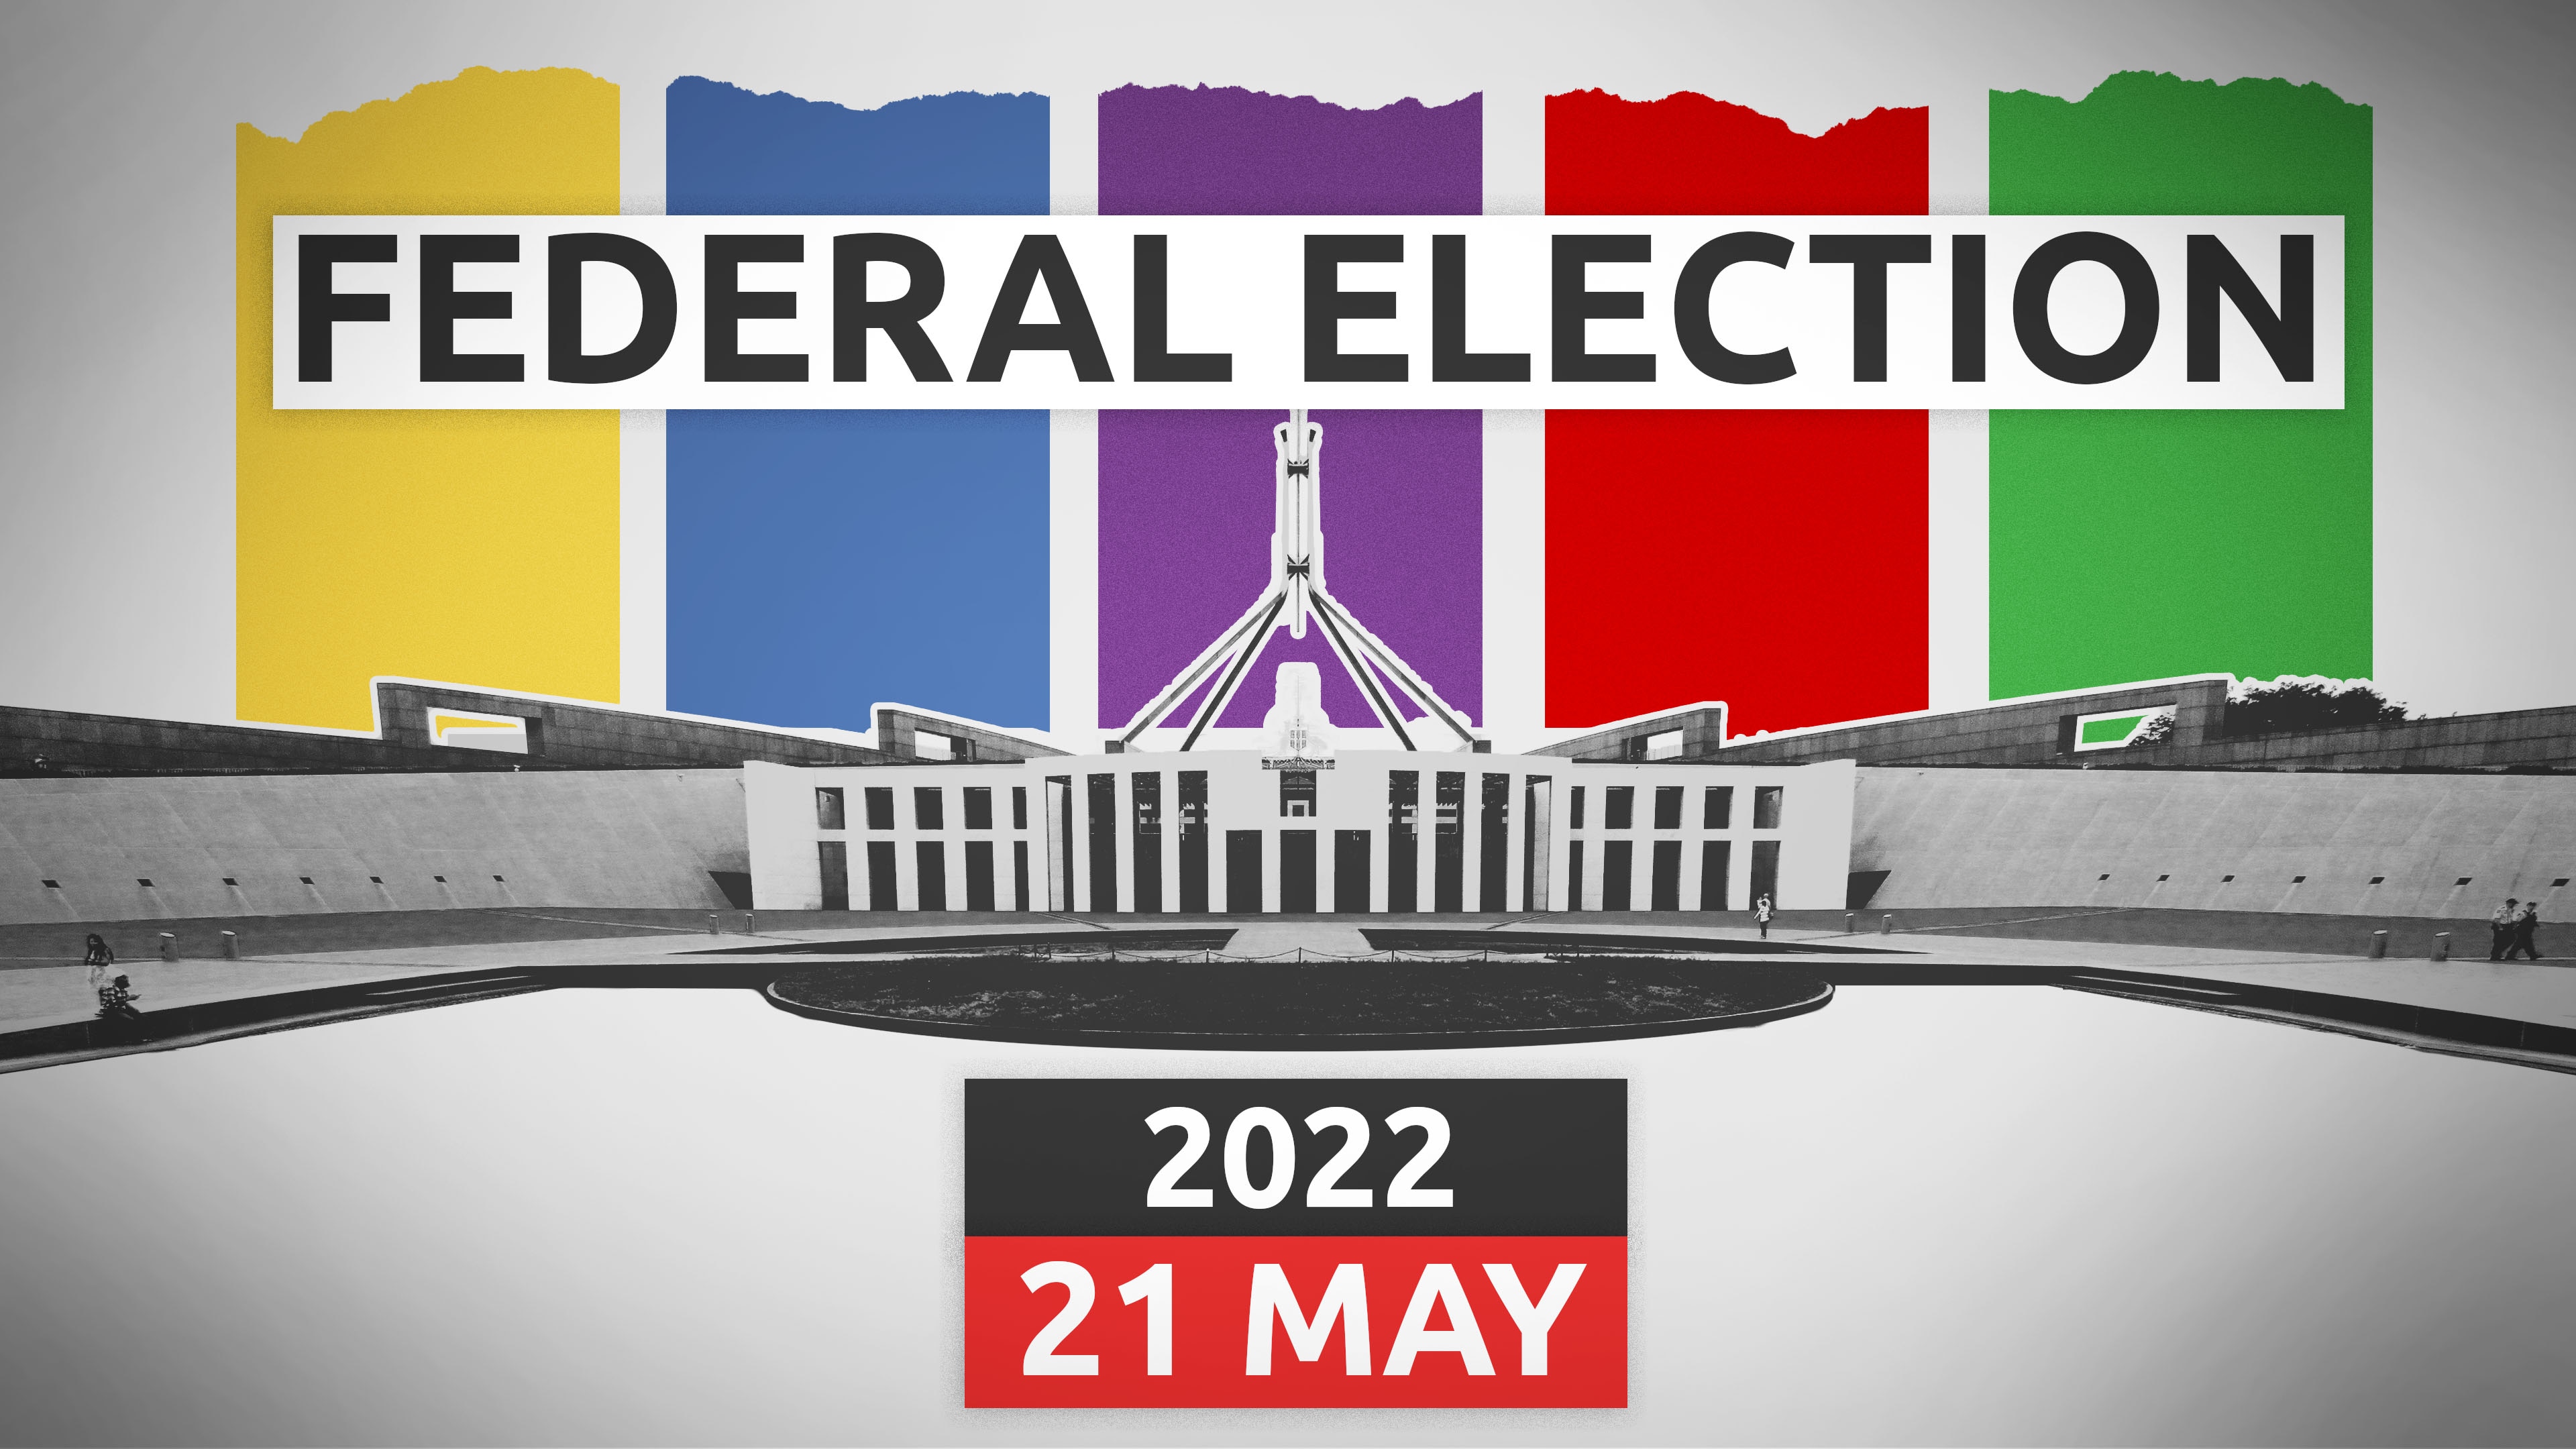 The federal election will take place on 21 May, 2022.